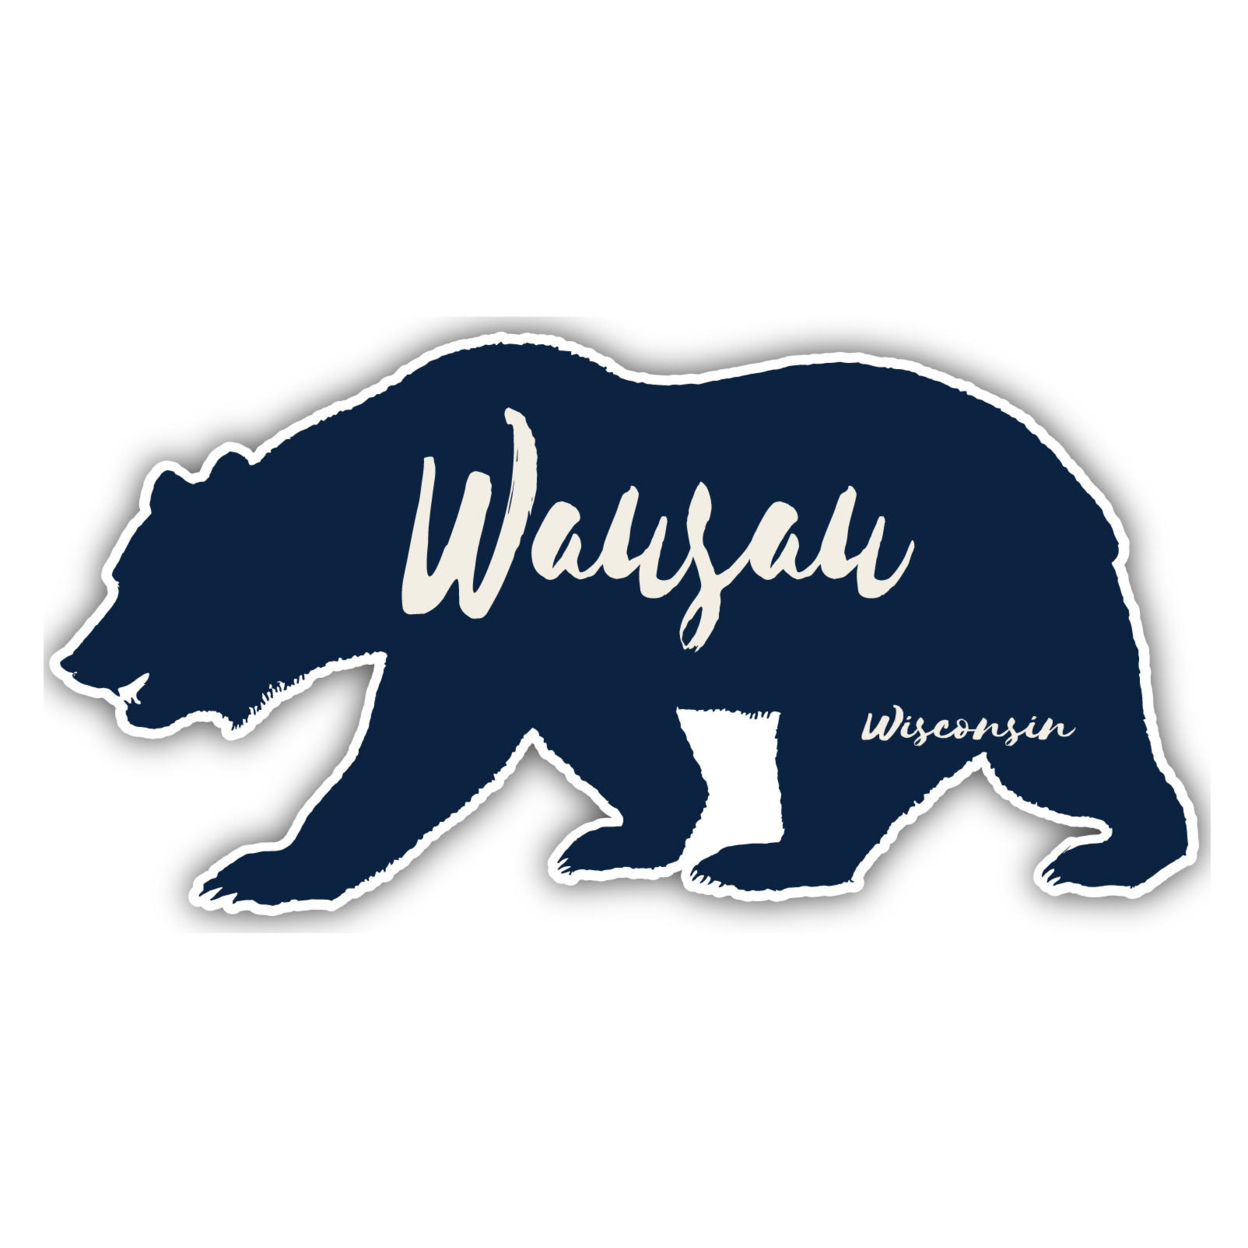 Wausau Wisconsin Souvenir Decorative Stickers (Choose Theme And Size) - Single Unit, 4-Inch, Great Outdoors